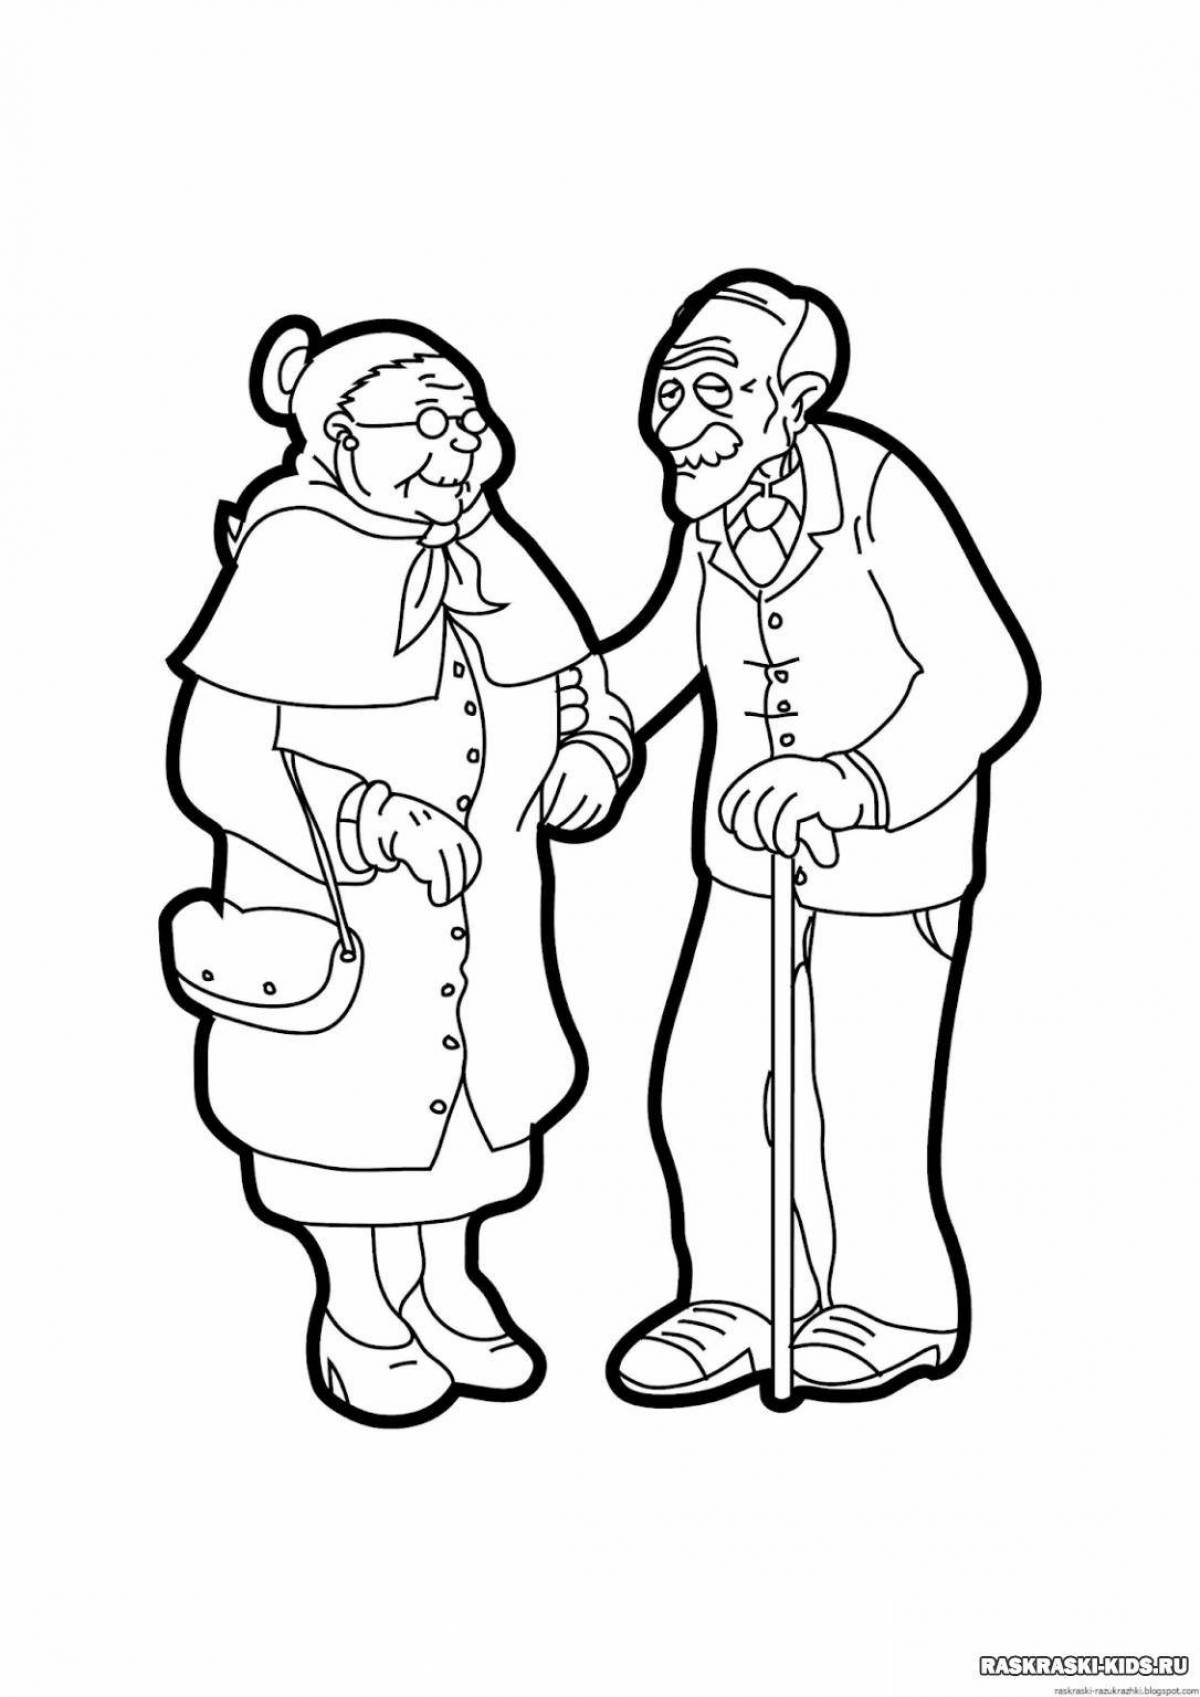 Glowing grandparents coloring book for kids